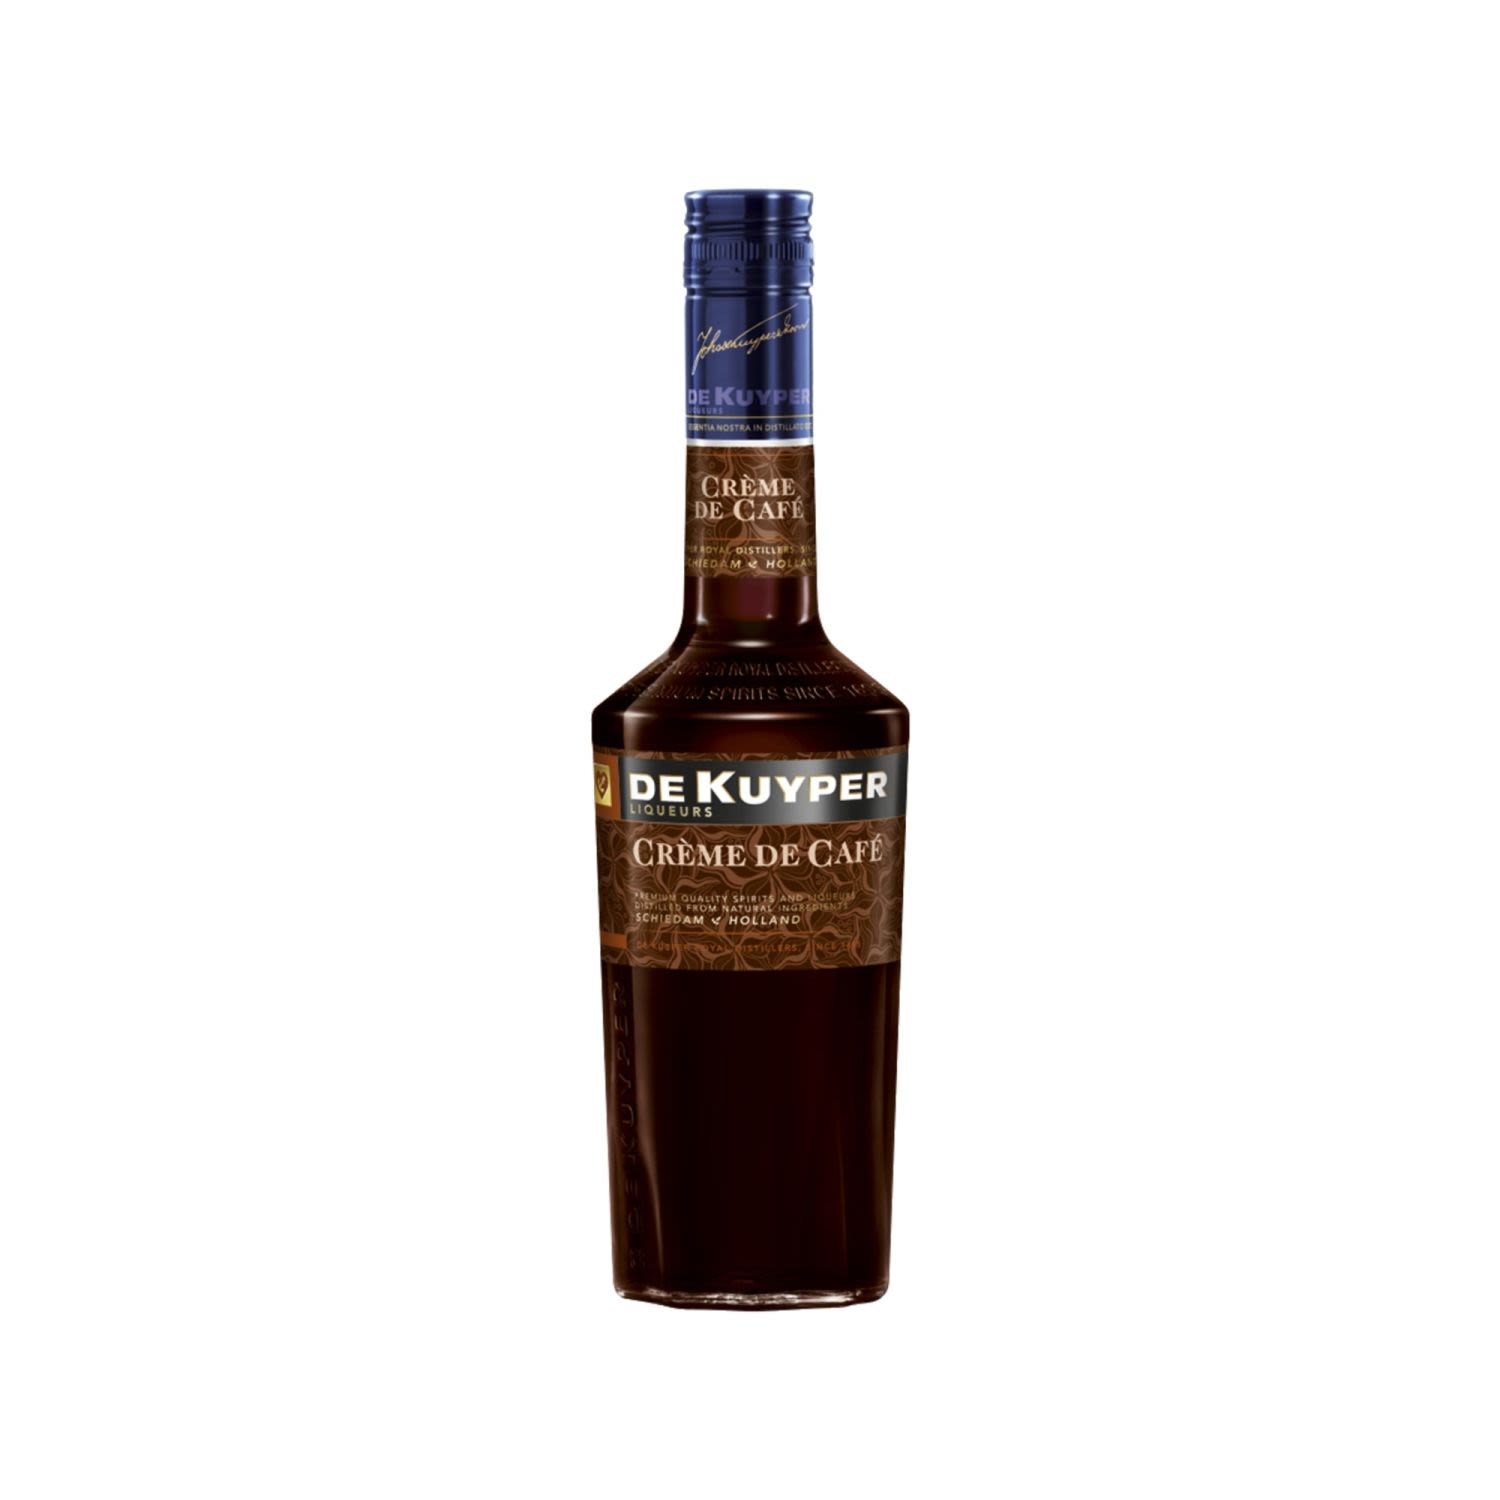 After soaking ground coffee in water and extracting its pleasant, typical sour aroma, De Kuyper add vanilla, cacao and a dash of cognac to give this liqueur its special flavour note.<br /> <br />Alcohol Volume: 20.00%<br /><br />Pack Format: Bottle<br /><br />Standard Drinks: 11</br /><br />Pack Type: Bottle<br /><br />Country of Origin: Netherlands<br />